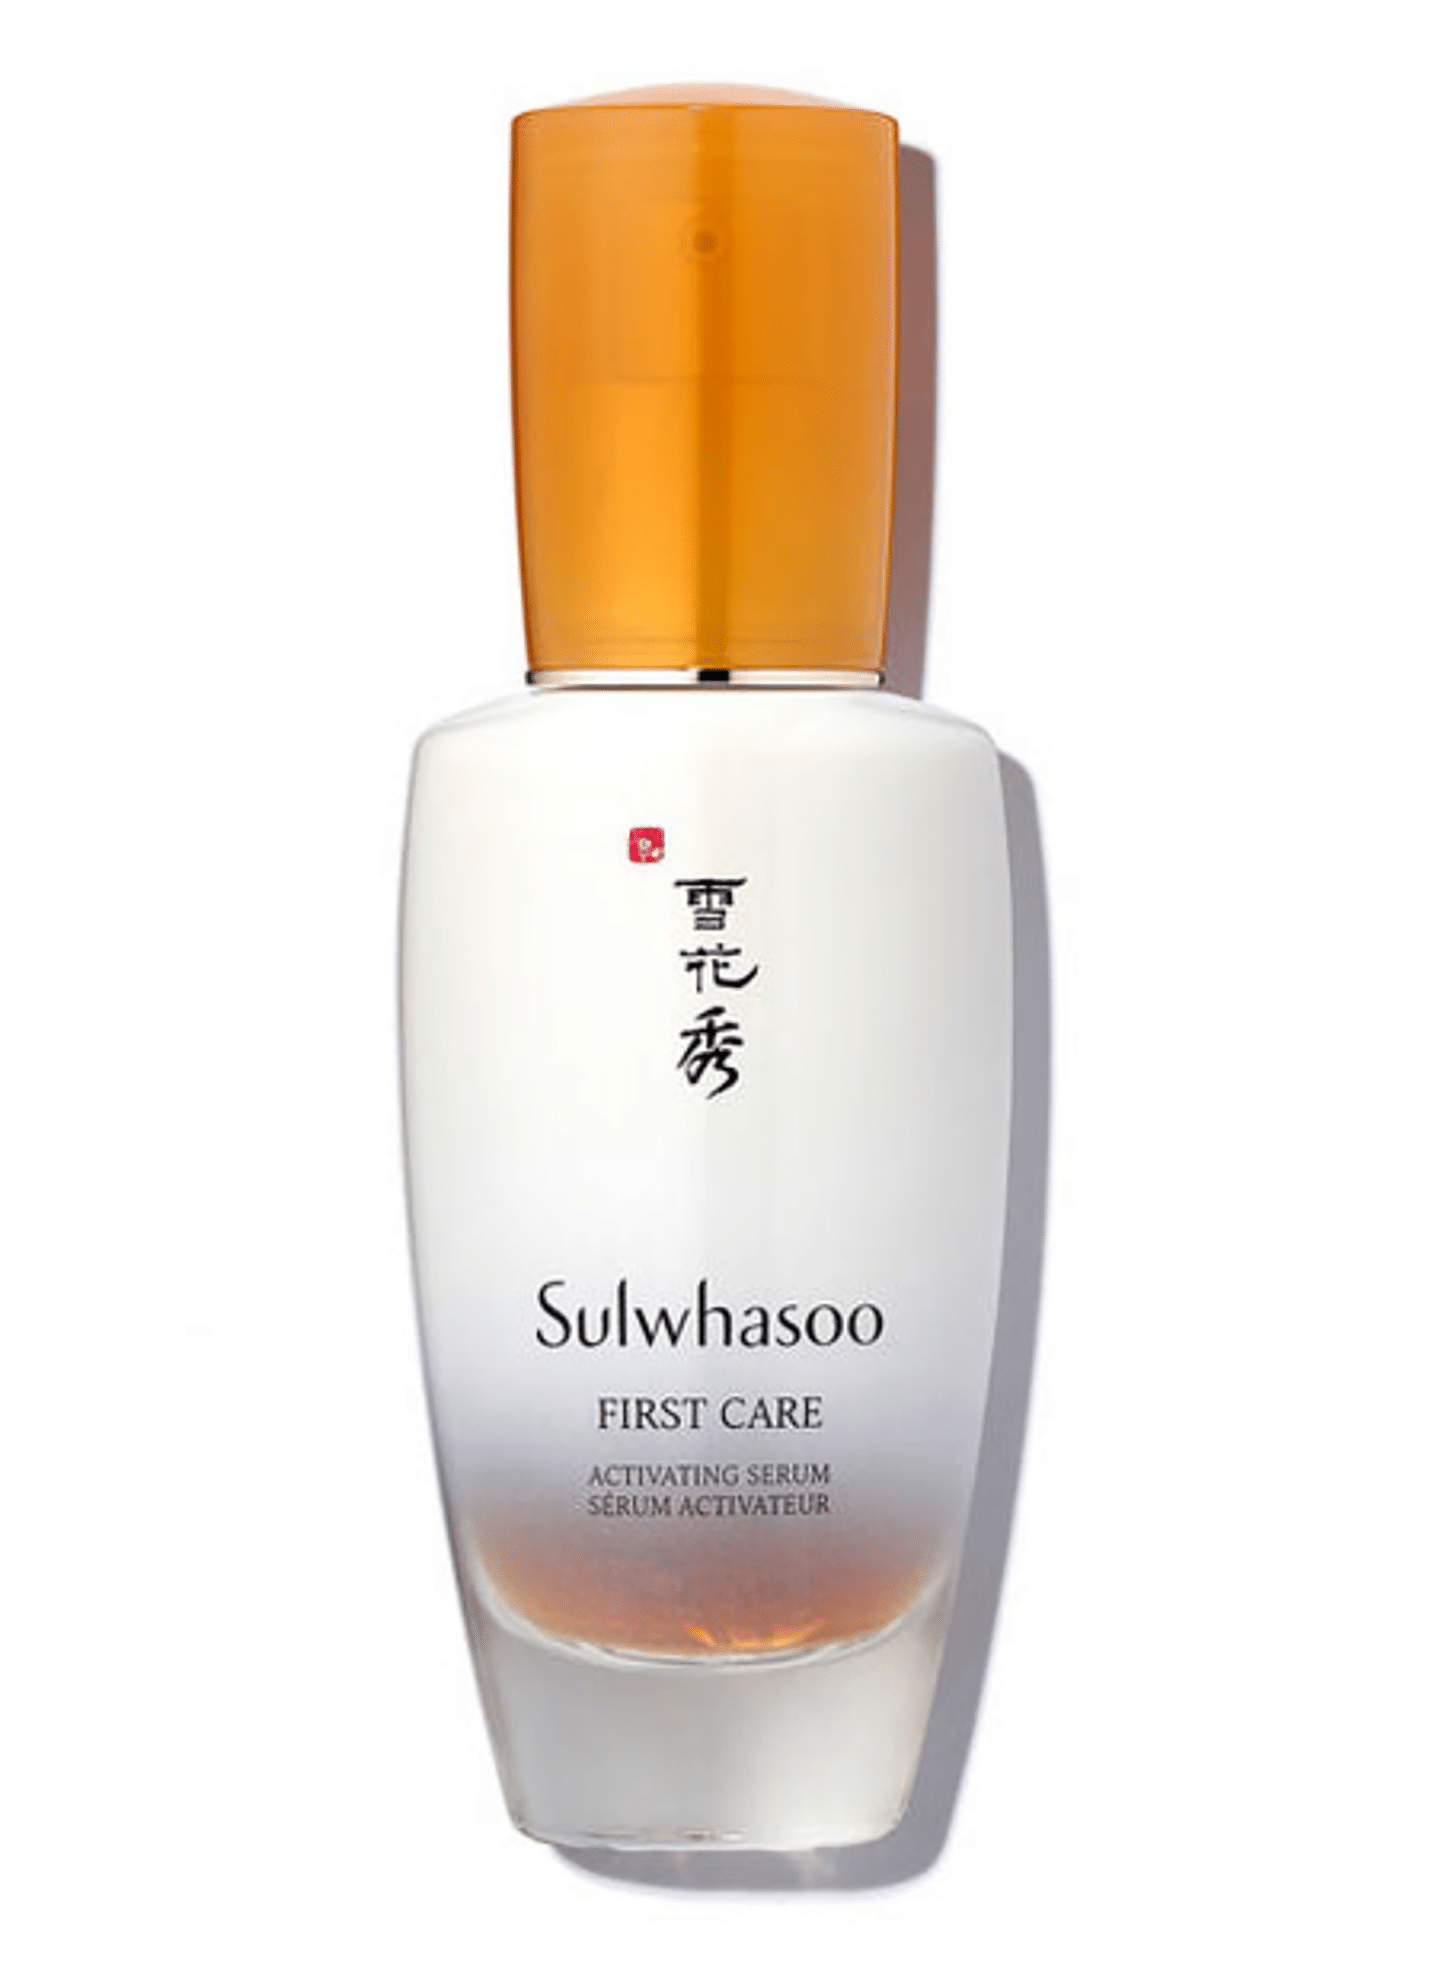 Sulwhasoo review, by beauty blogger What The Fab